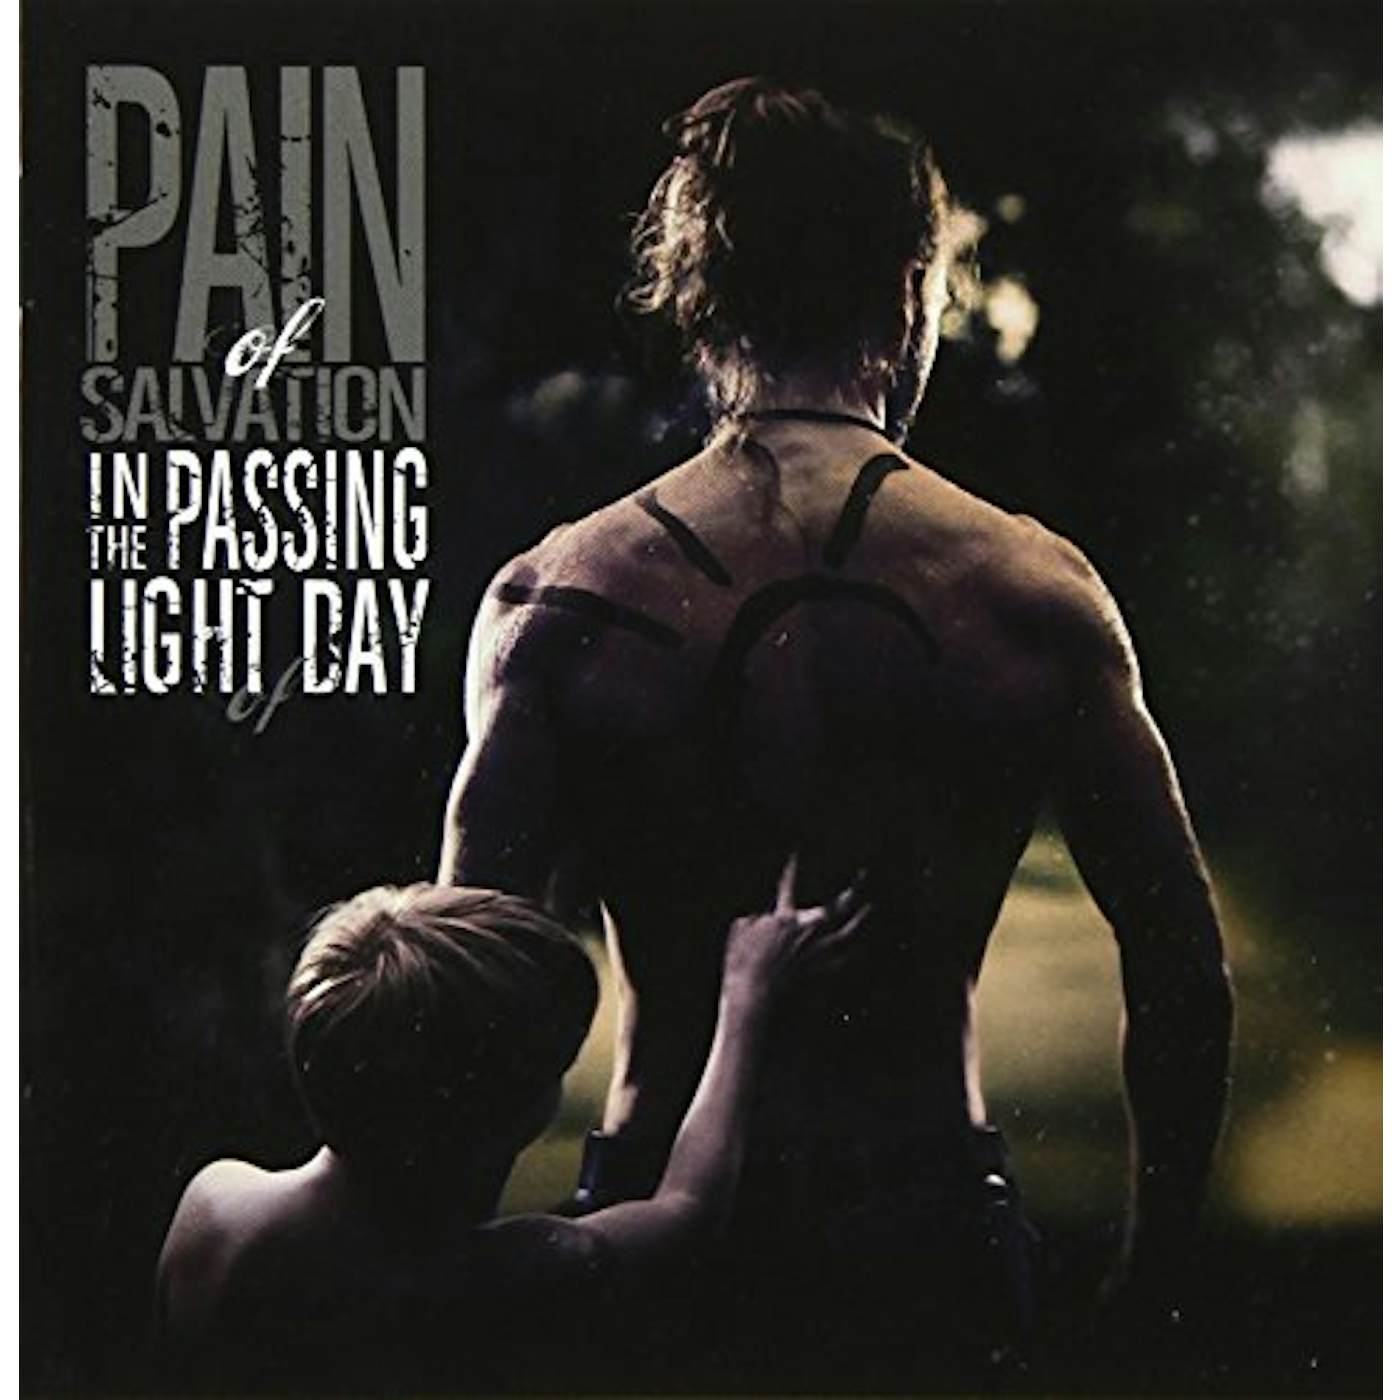 Pain of Salvation IN THE PASSING LIGHT CD